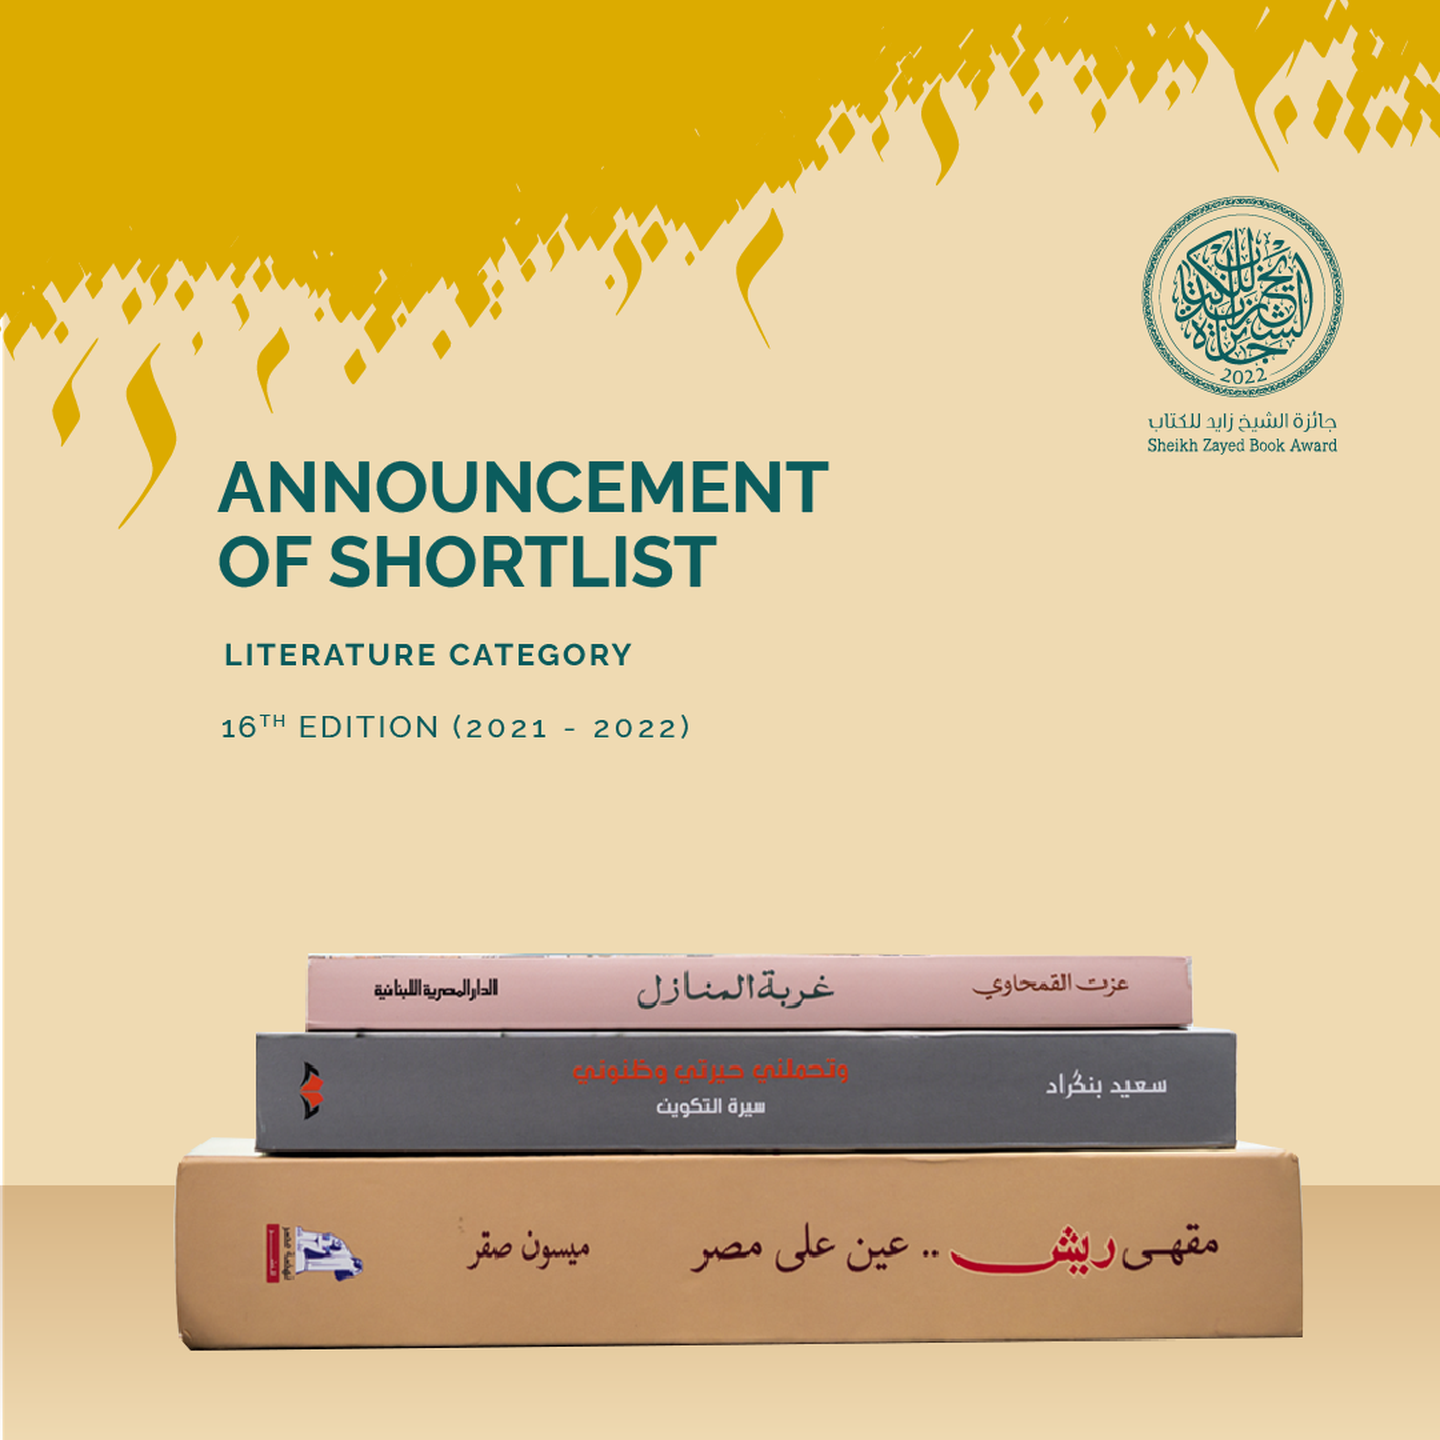 The three shortlisted works in the Literature category of the Sheikh Zayed Book Award 2022. Photo: Sheikh Zayed Book Award